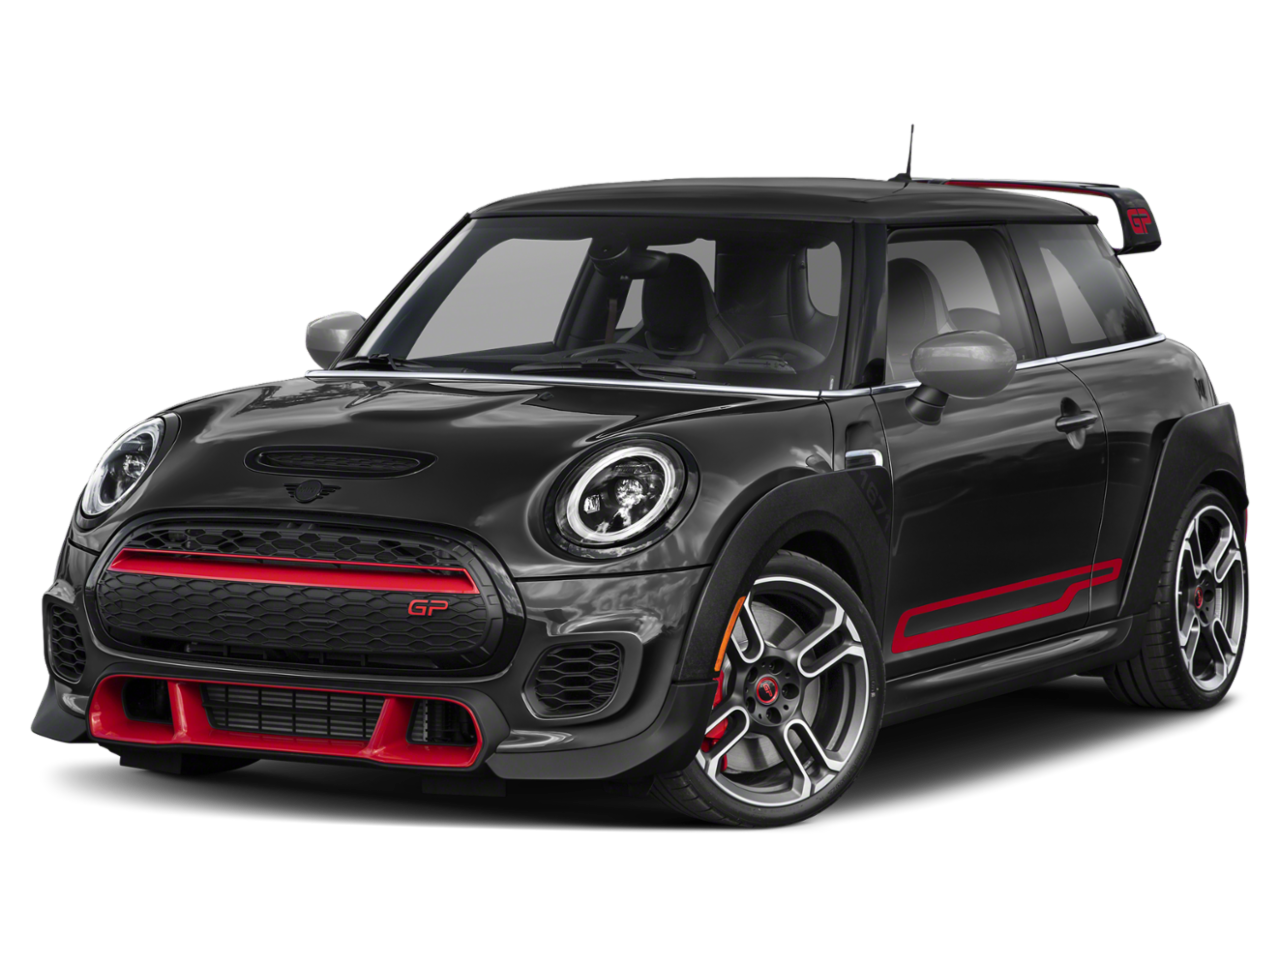 2021 MINI Hardtop 2 Door lease $959 Mo $0 Down Leases Available